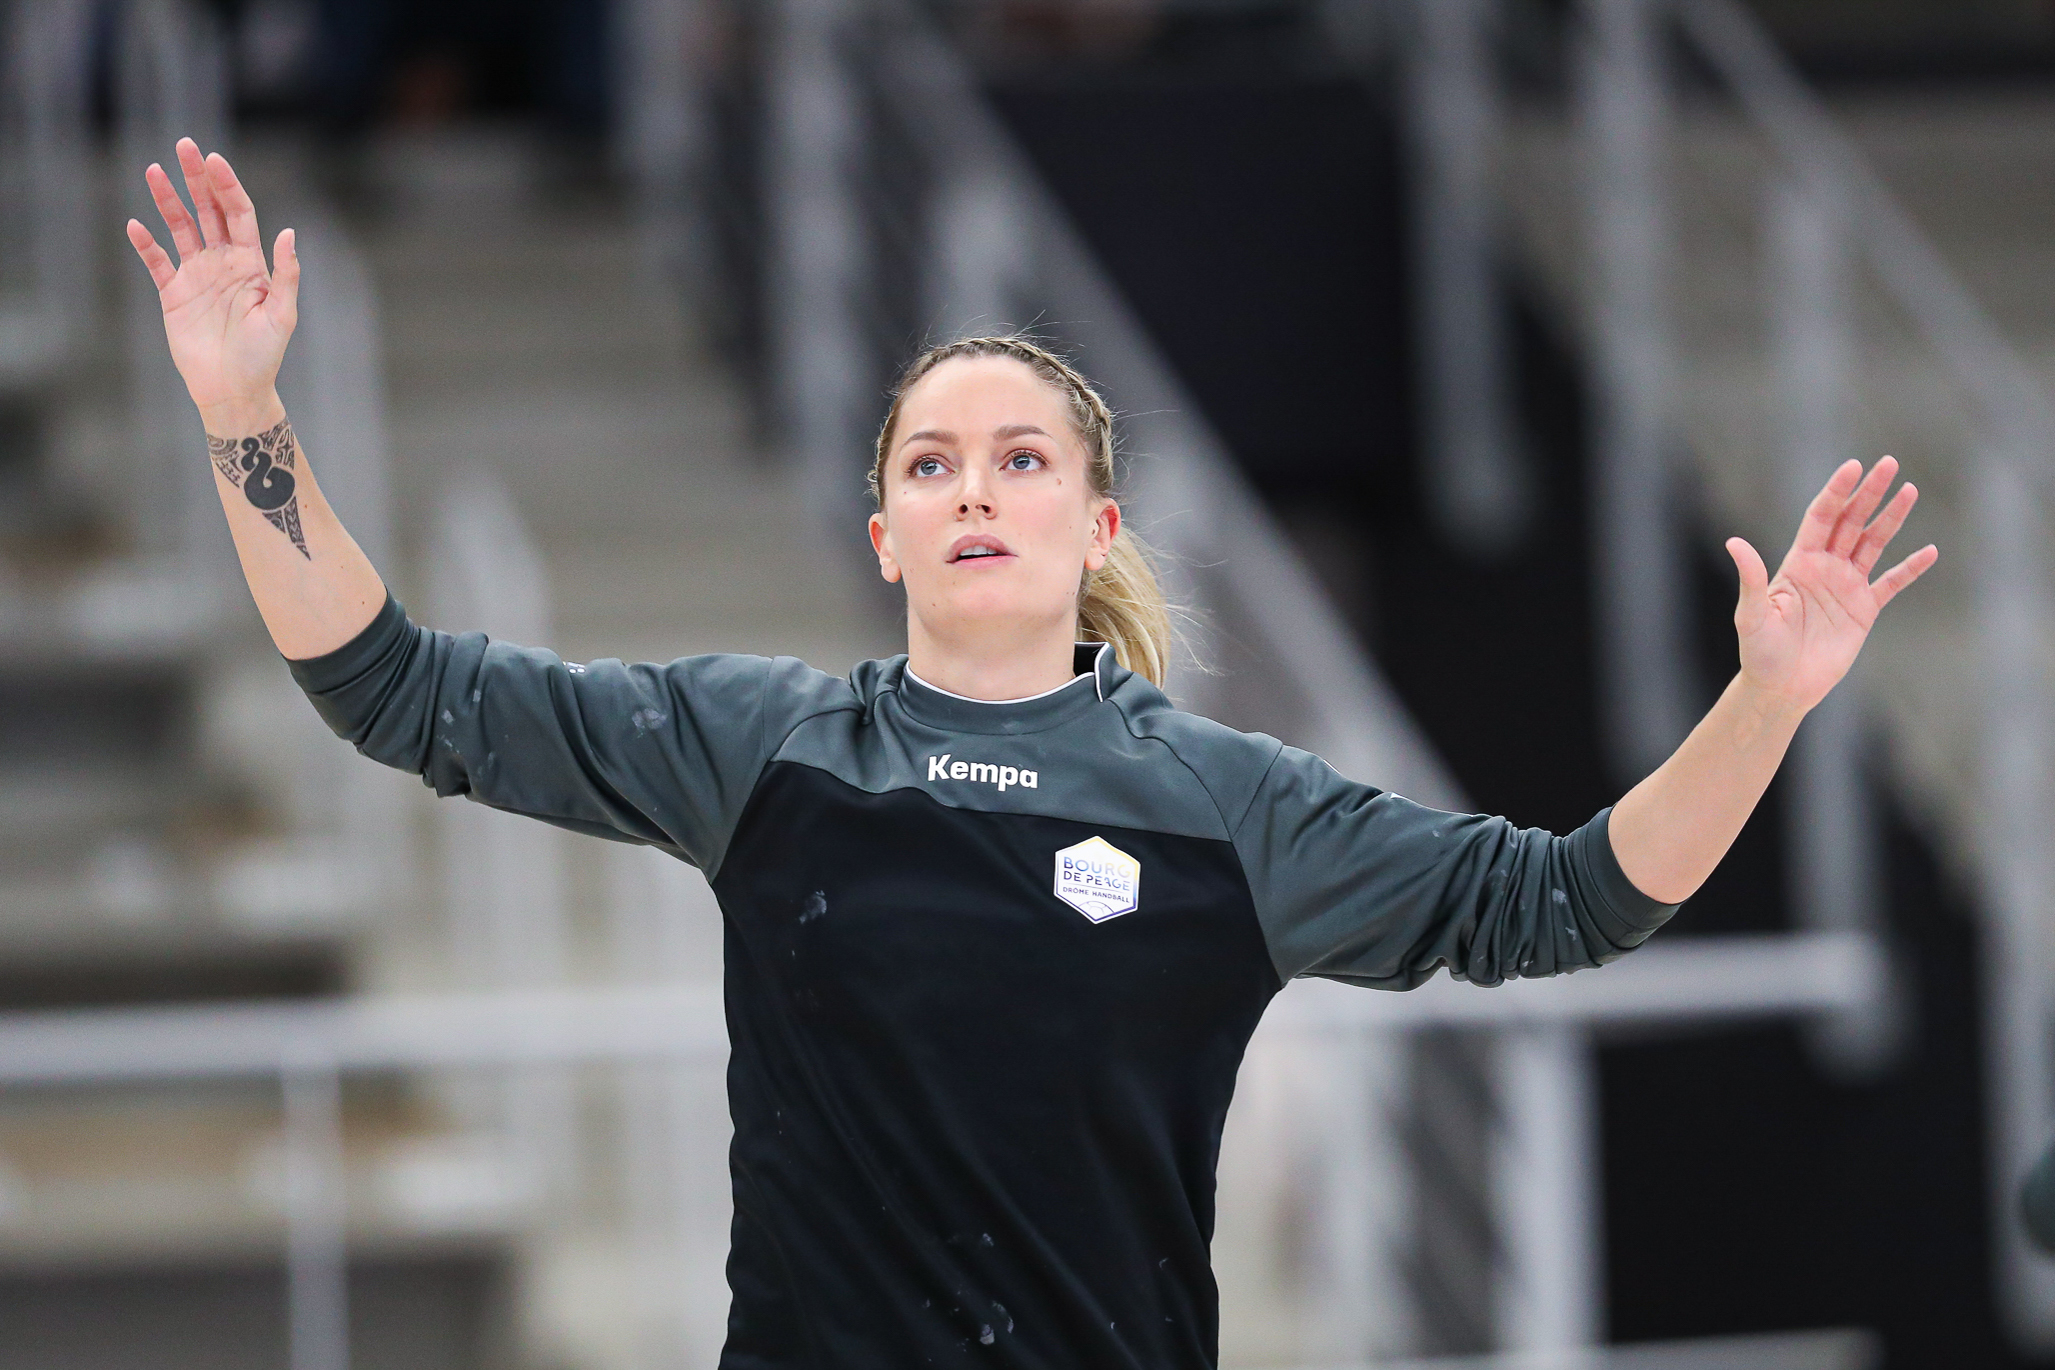 Manon Houette (Bourg de Péage) during the Ligue Butaguaz Energie match between Bourg de Peage and Besancon on October 20, 2021 in Bourg-de-Peage, France. (Photo by Bertrand Delhomme/Icon Sport)